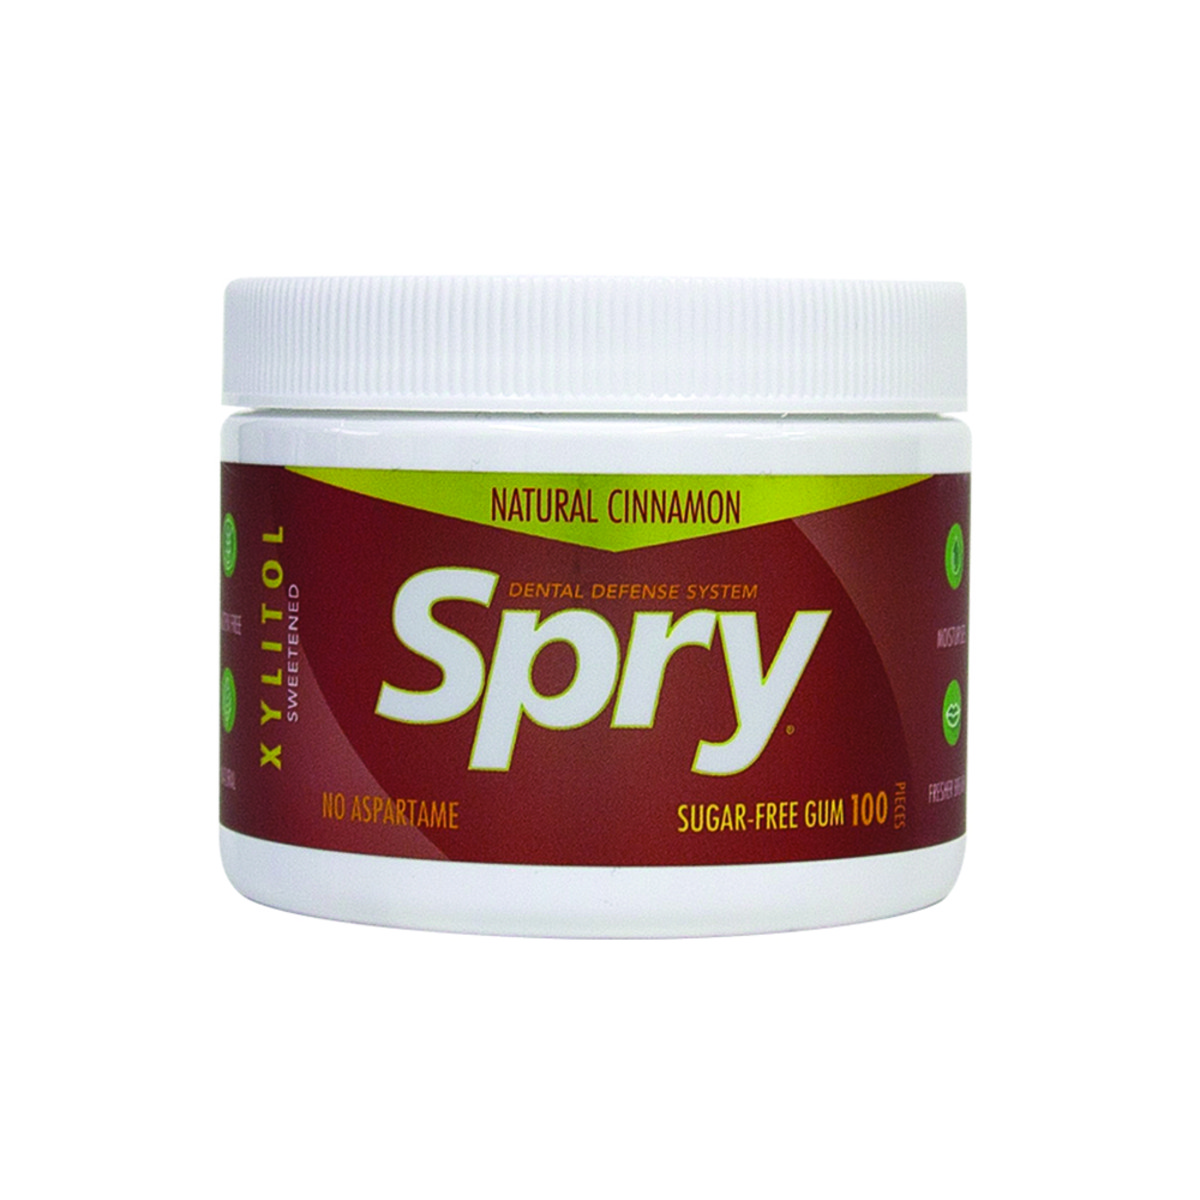 Spry Xylitol Chewing Gum Cinnamon 100 Pieces Tub